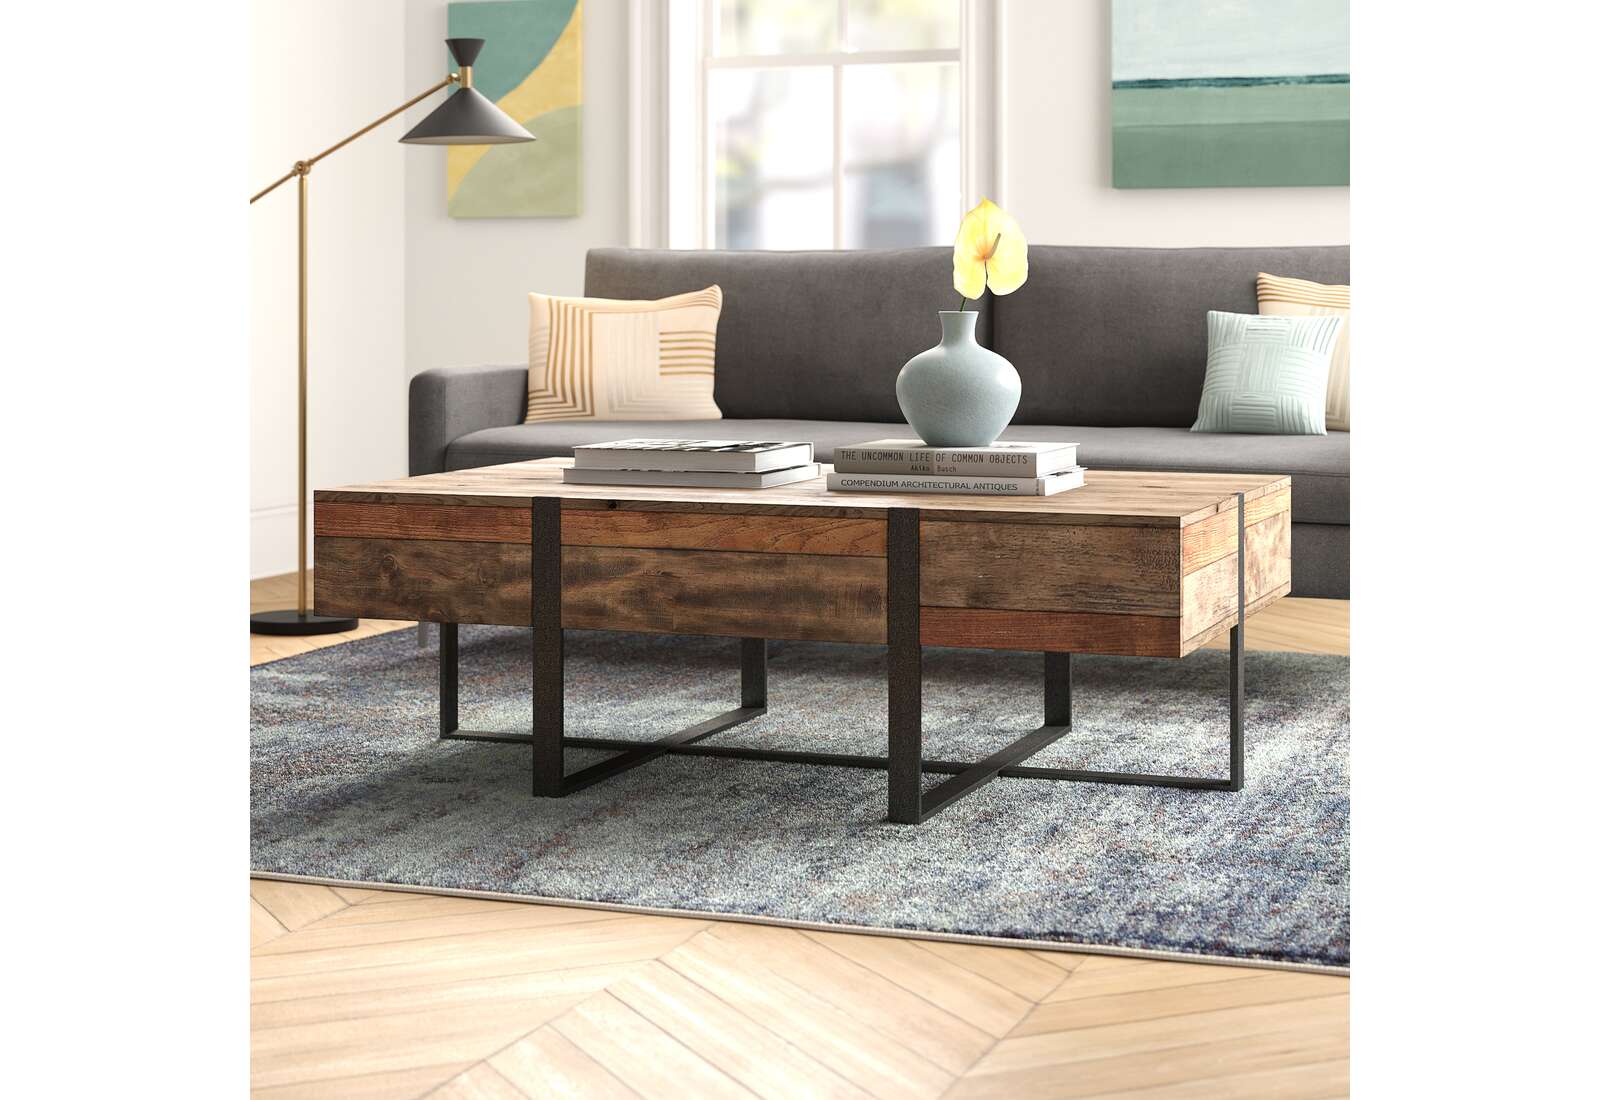 Coffee Table Size: How to Choose the Right Coffee Table Dimensions